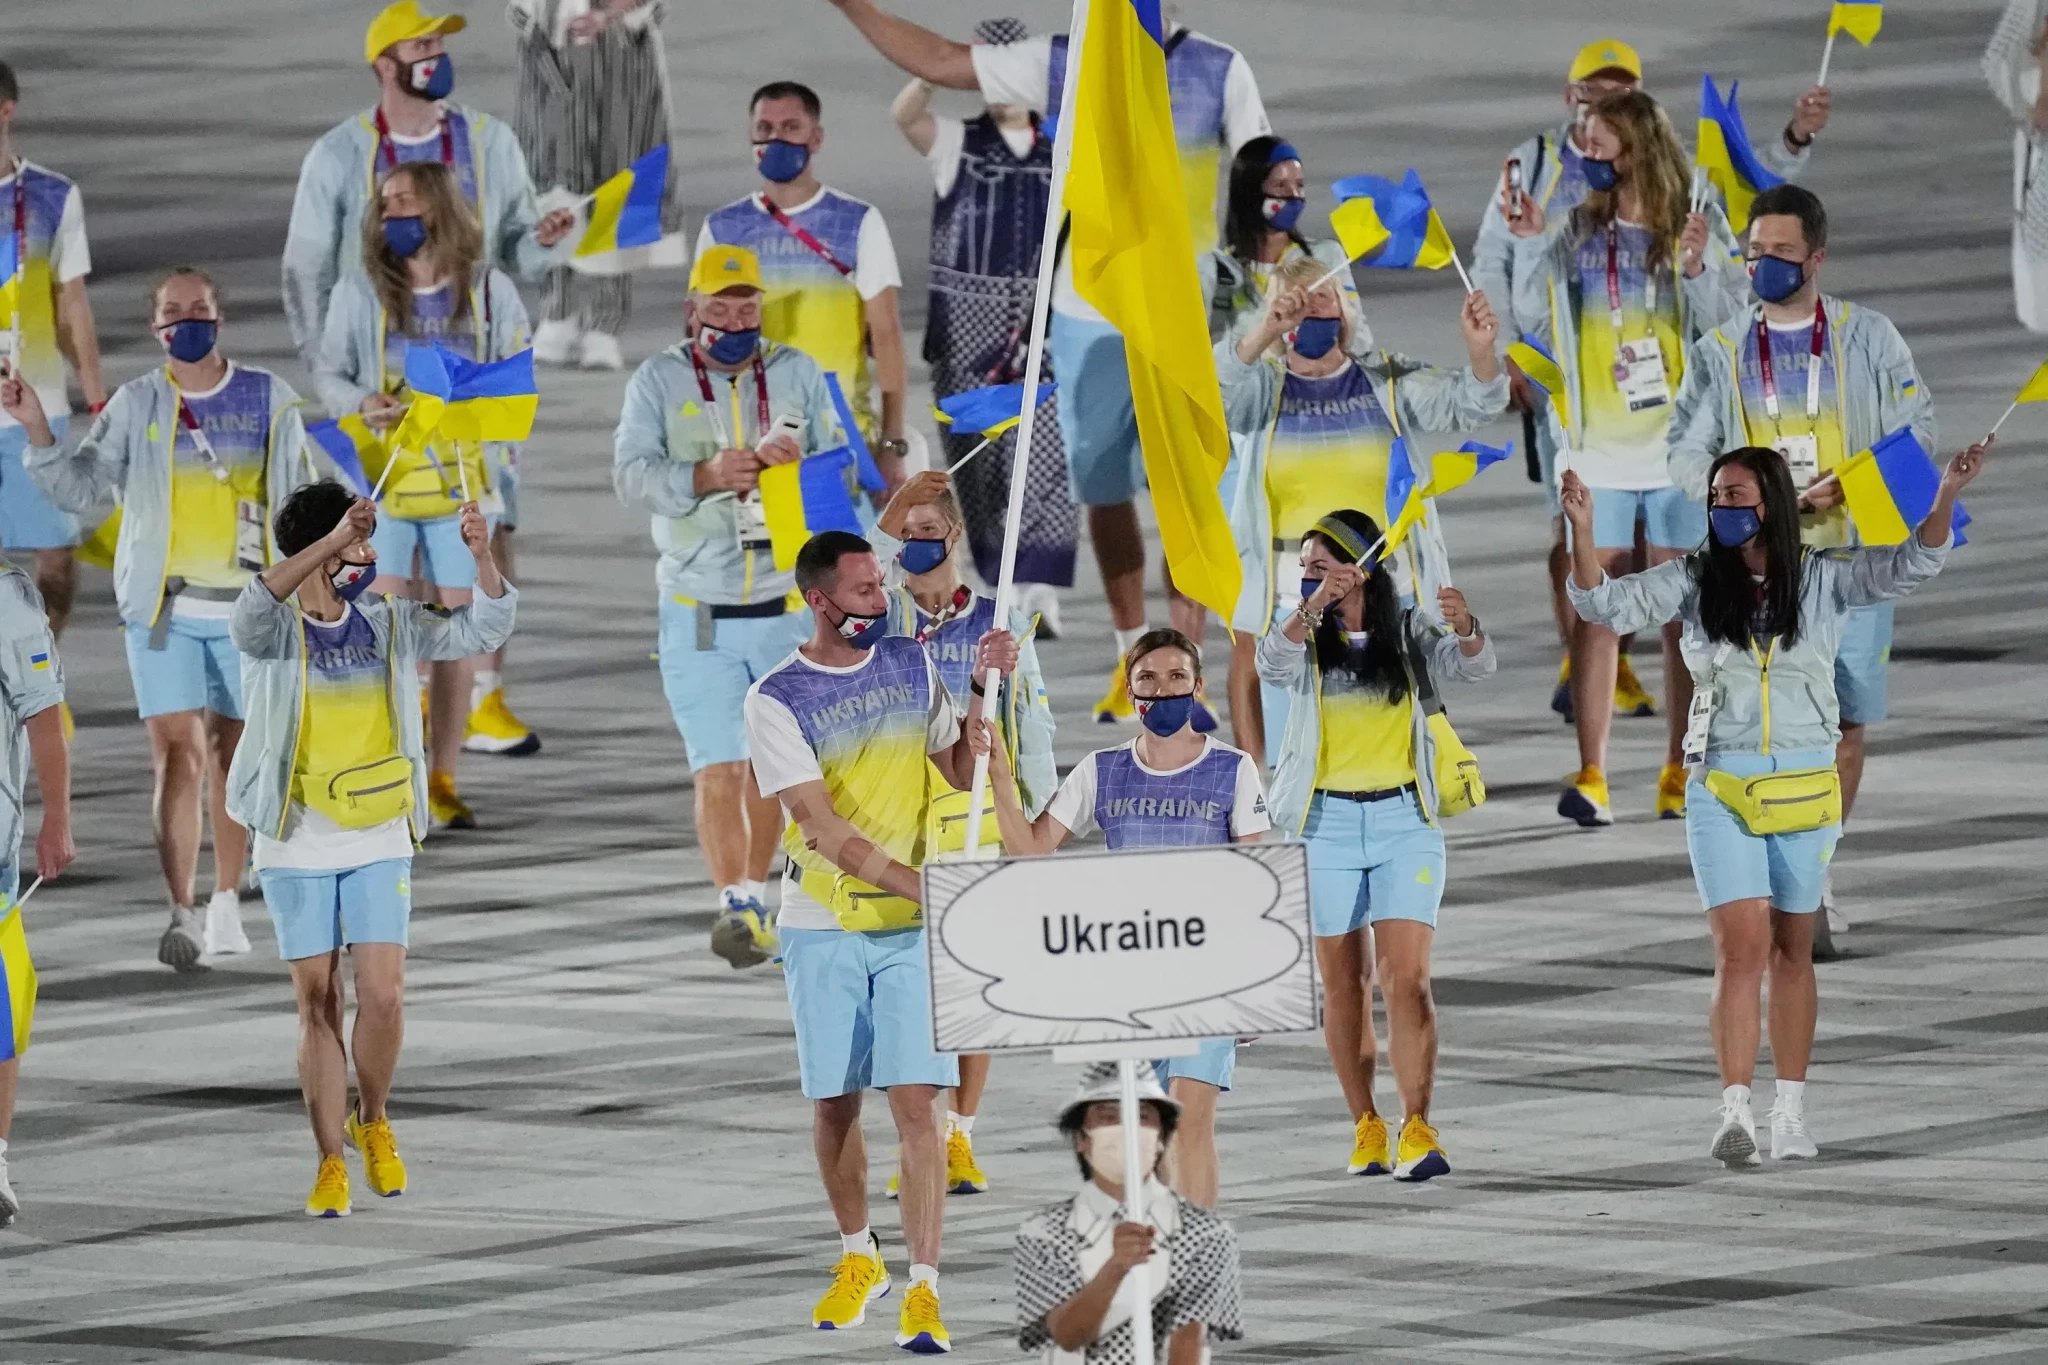 Ukraine will not participate in any Olympic qualifying events for Paris 2024 where they would have to compete against athletes from Russia, they have announced ©Getty Images 